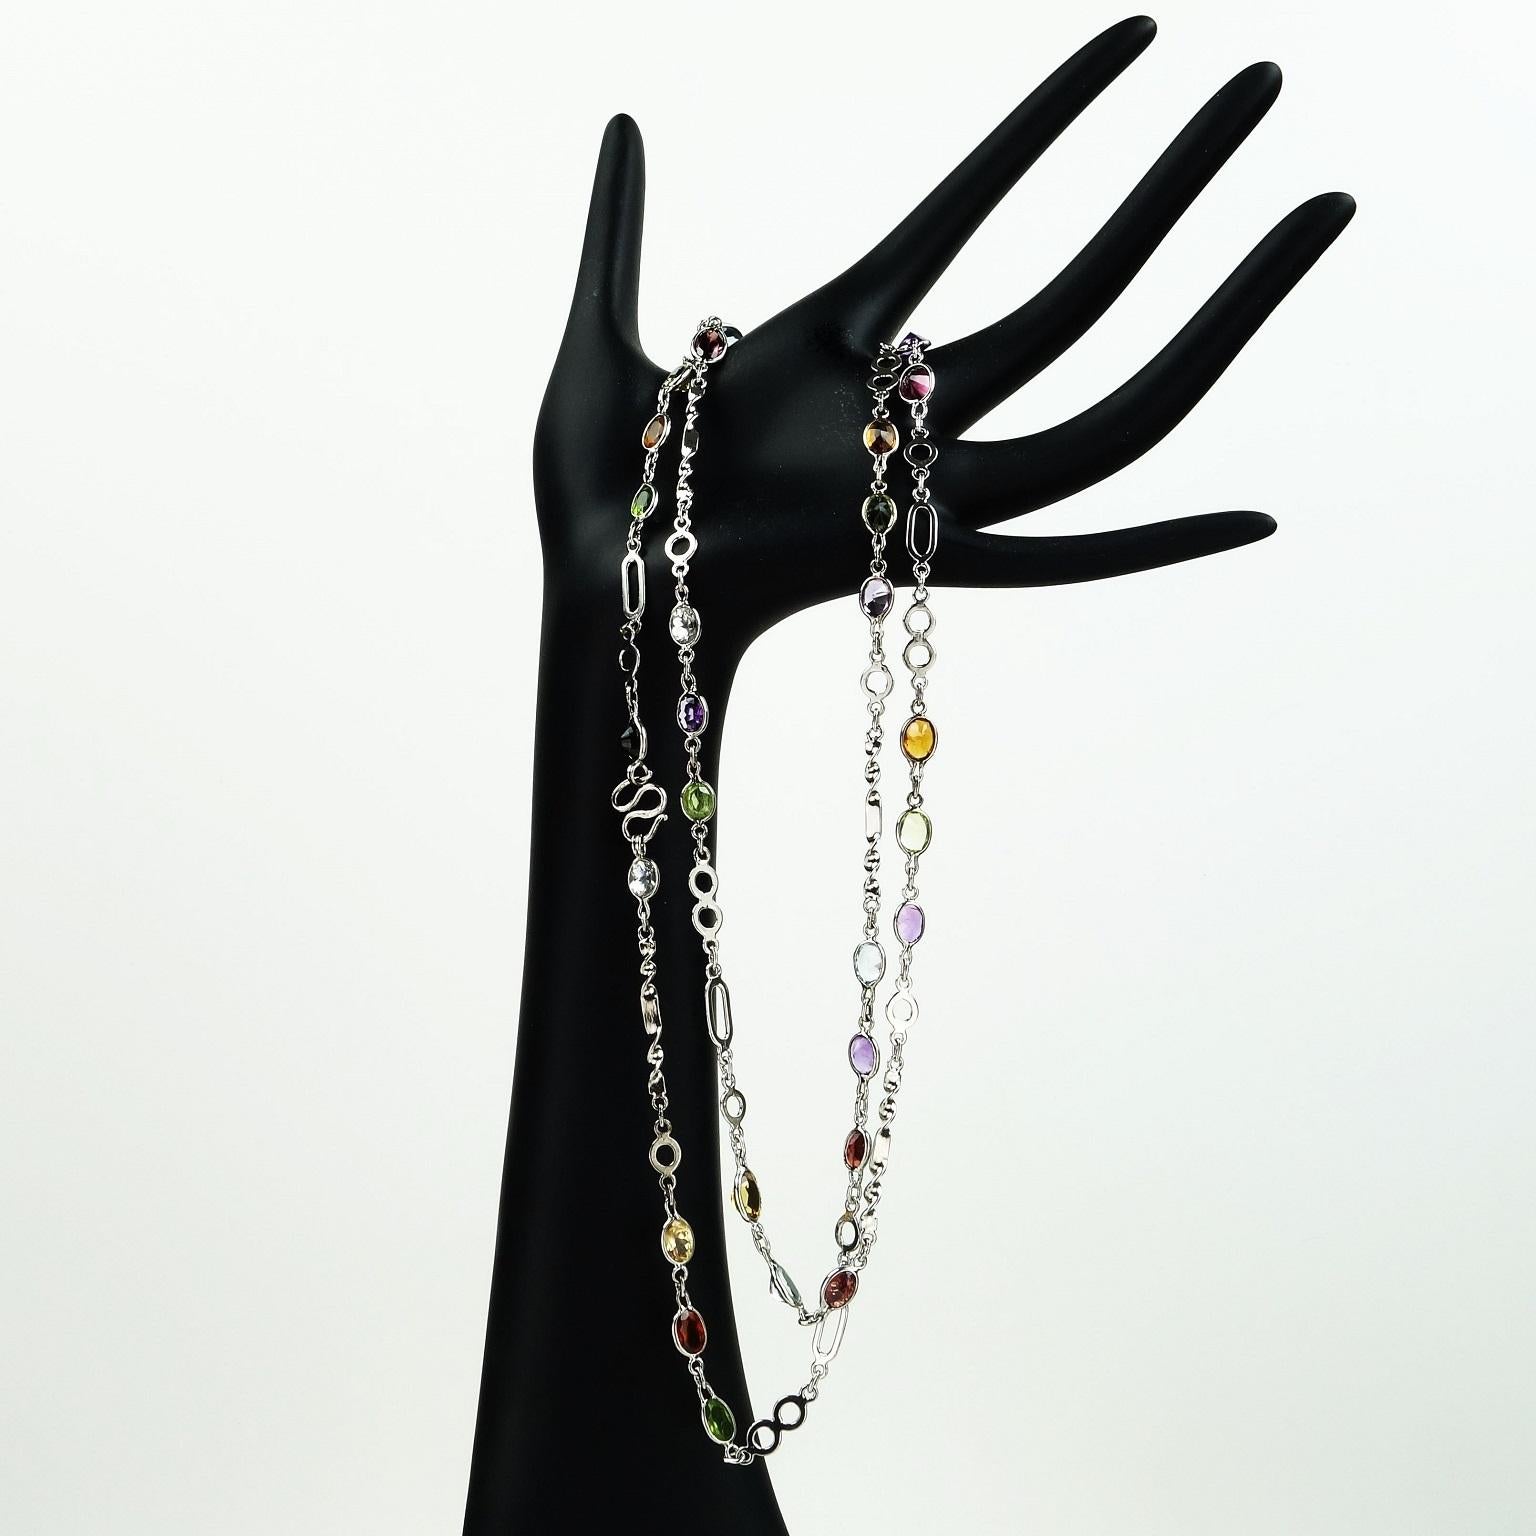 Necklace of Sterling Silver with bursts of oval faceted gemstones. 36 Inches in length is very versatile, this can easily be doubled. The gemstones include amethyst, citrine, peridot, and blue topaz.